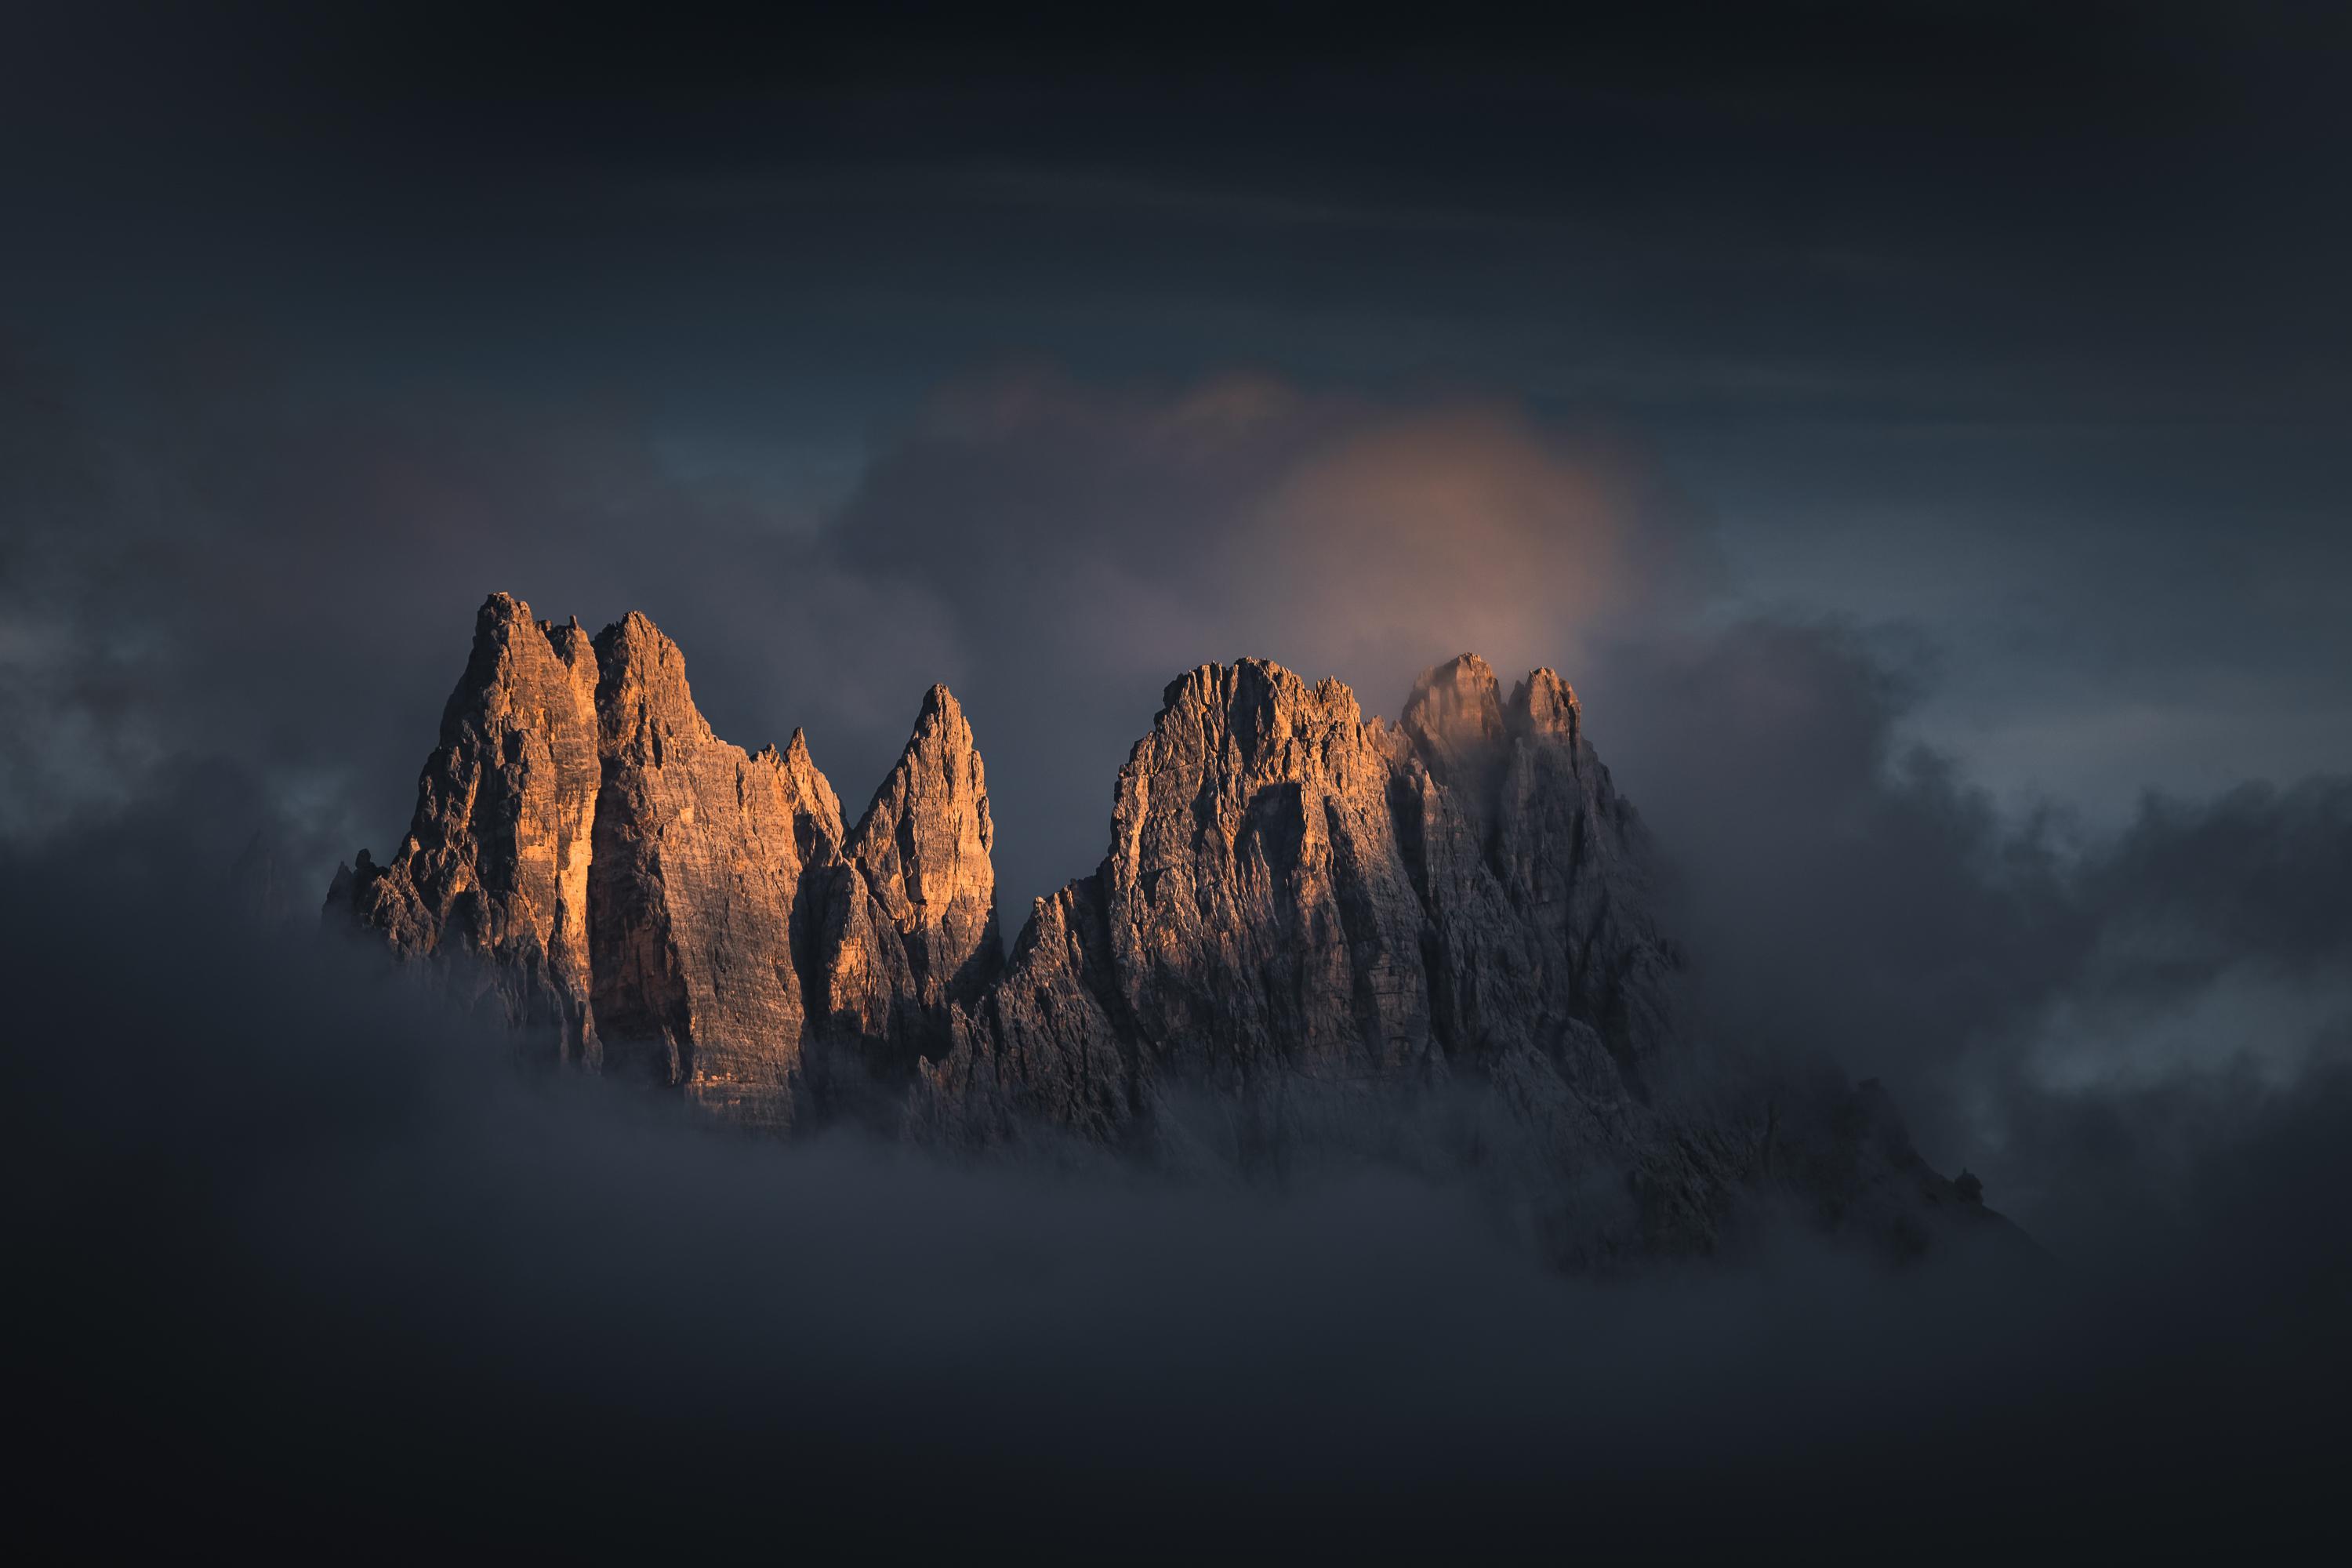 Dolomites 4K wallpaper for your desktop or mobile screen free and easy to download